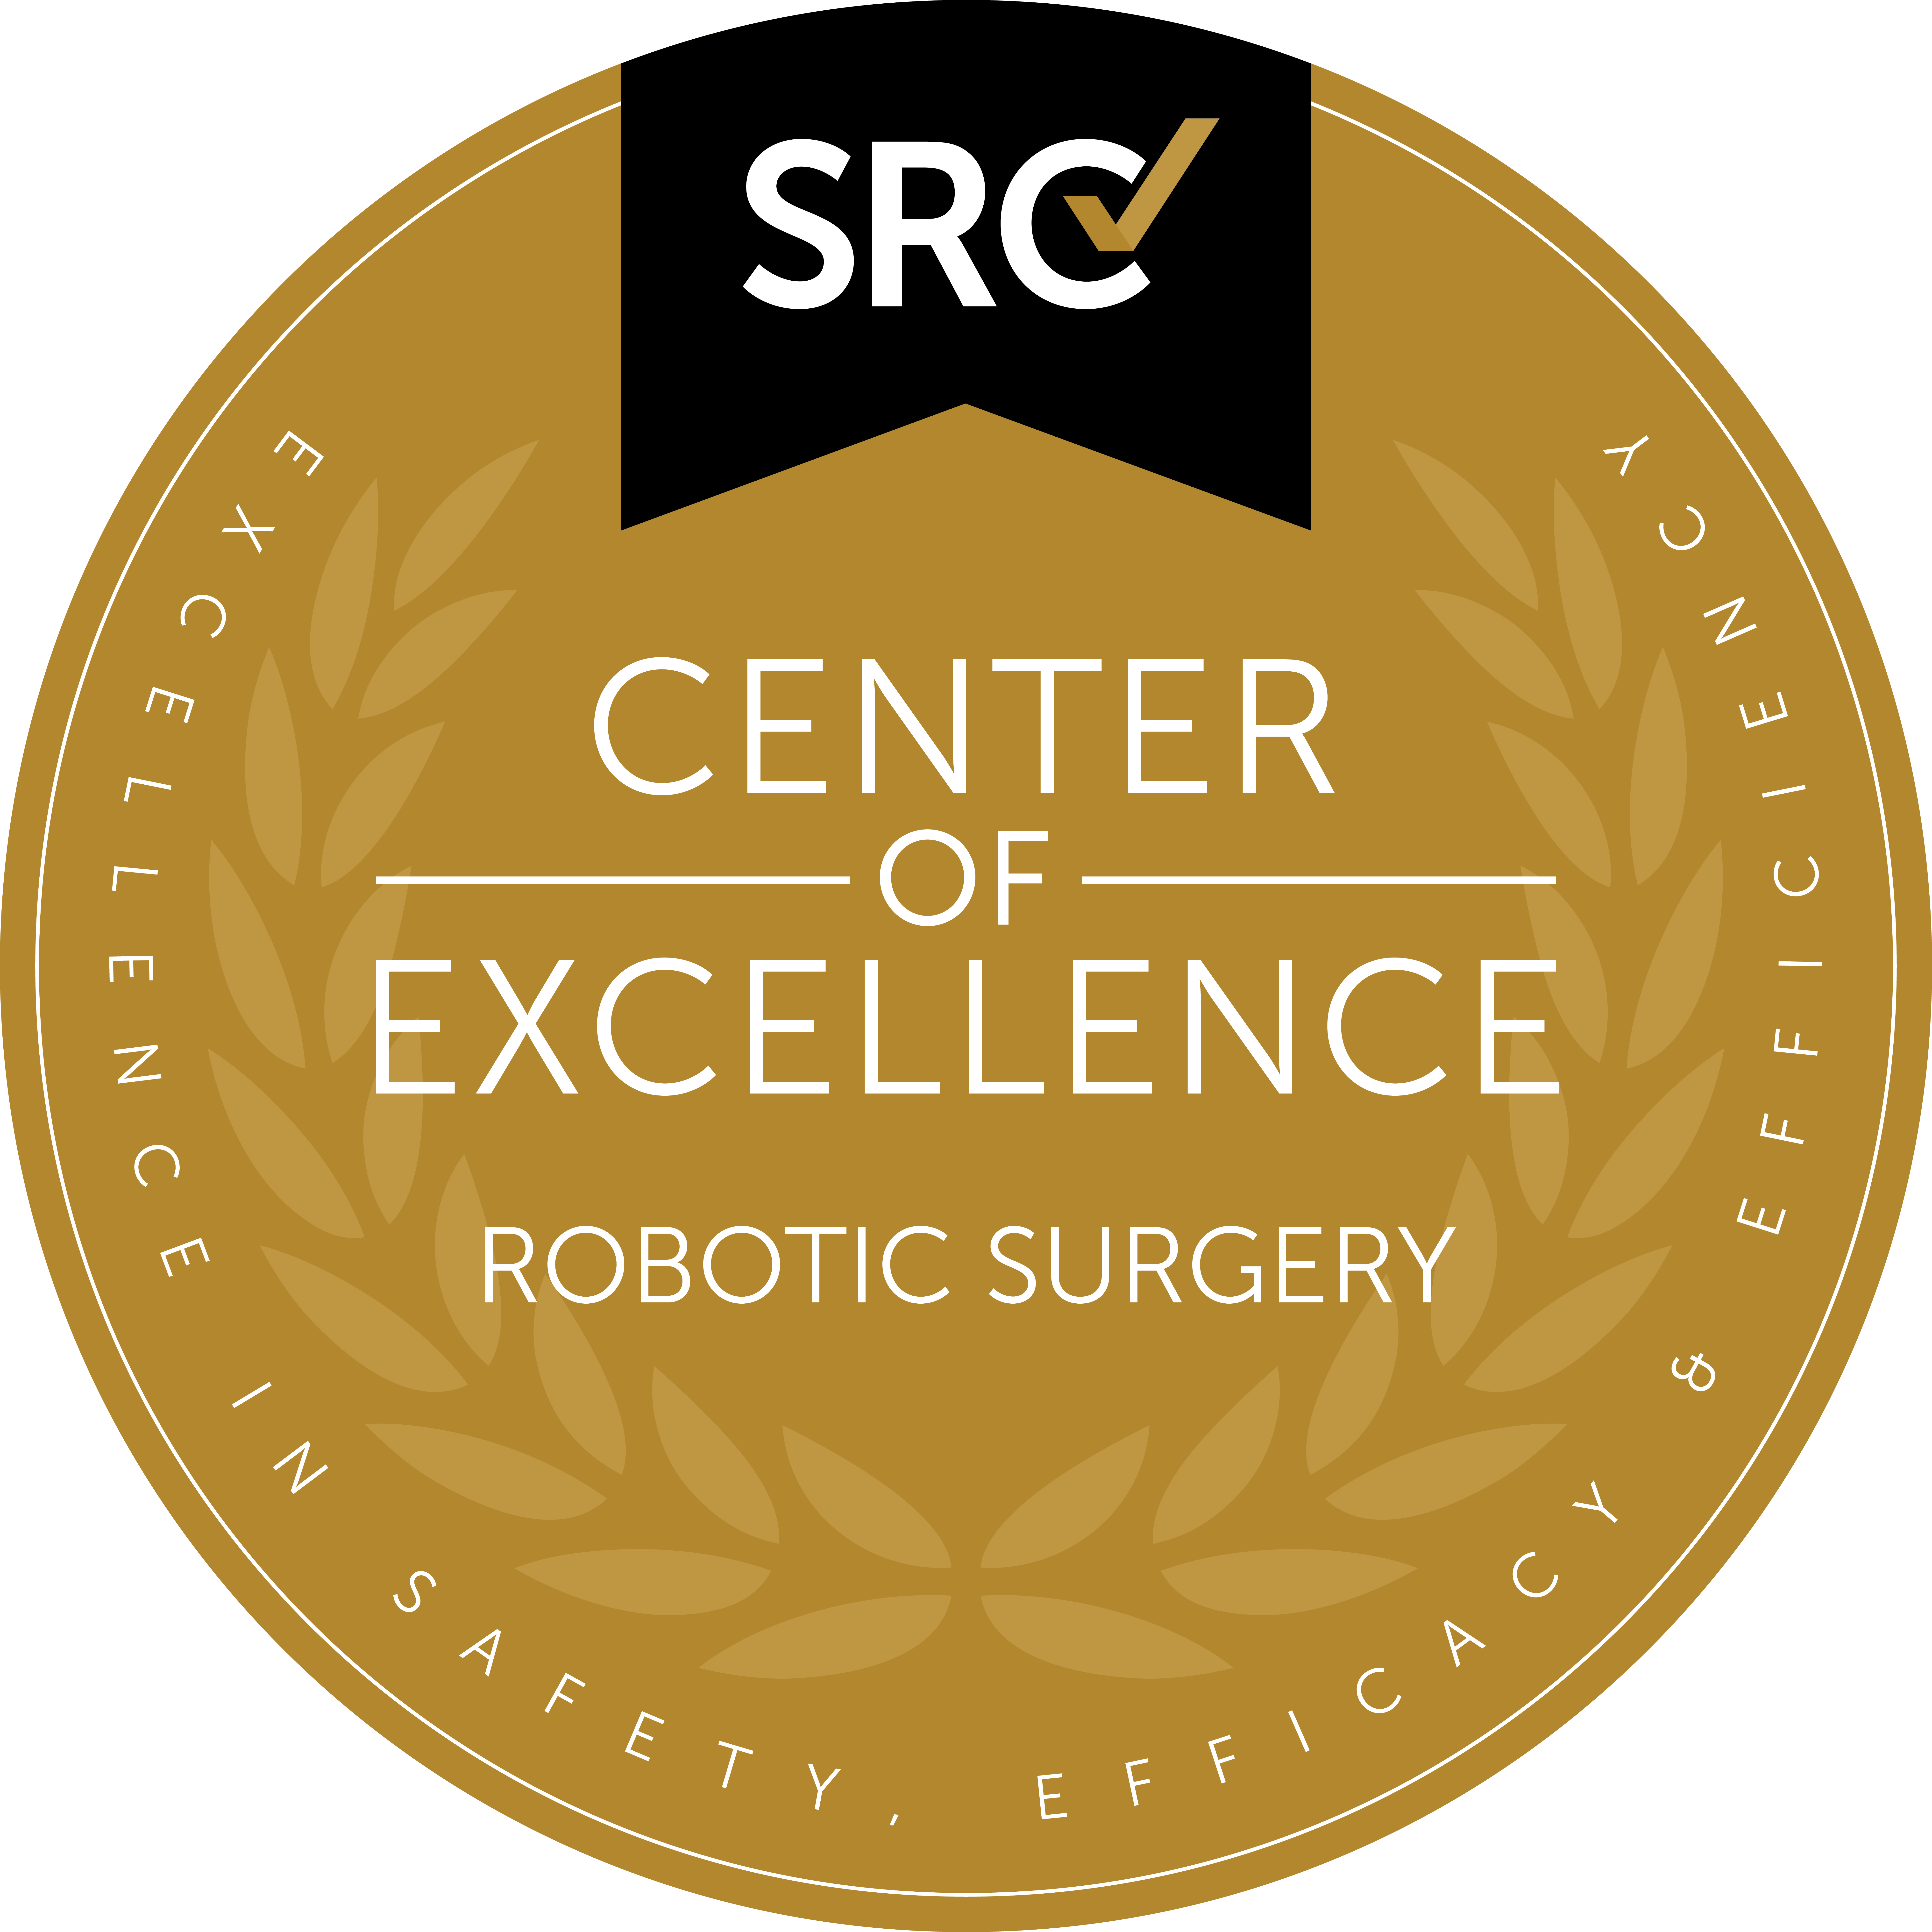 Center of excellence robotic surgery